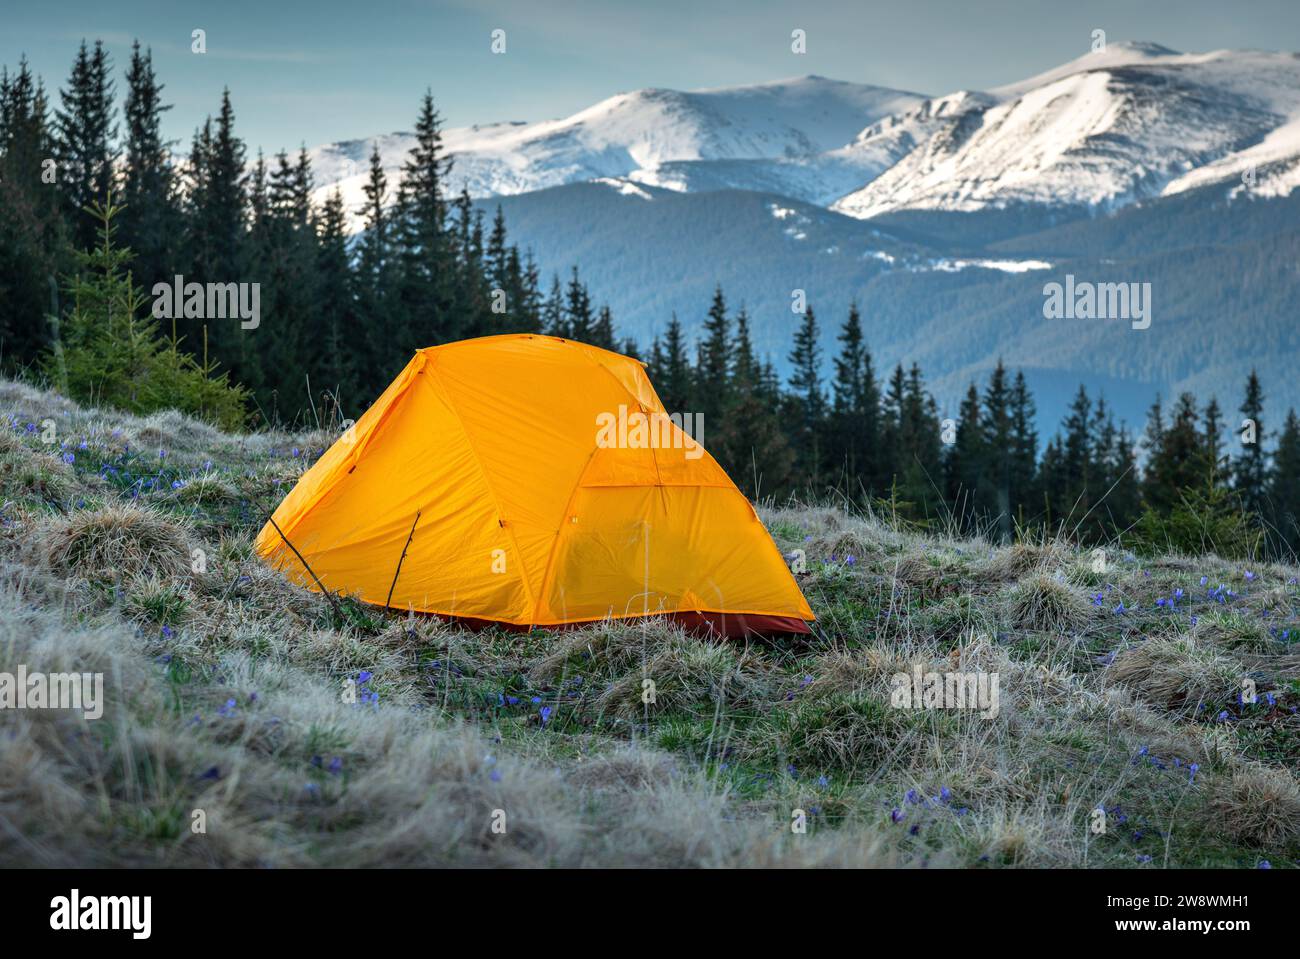 Tent Camping In The Mountains, First Morning Light Stock Photo